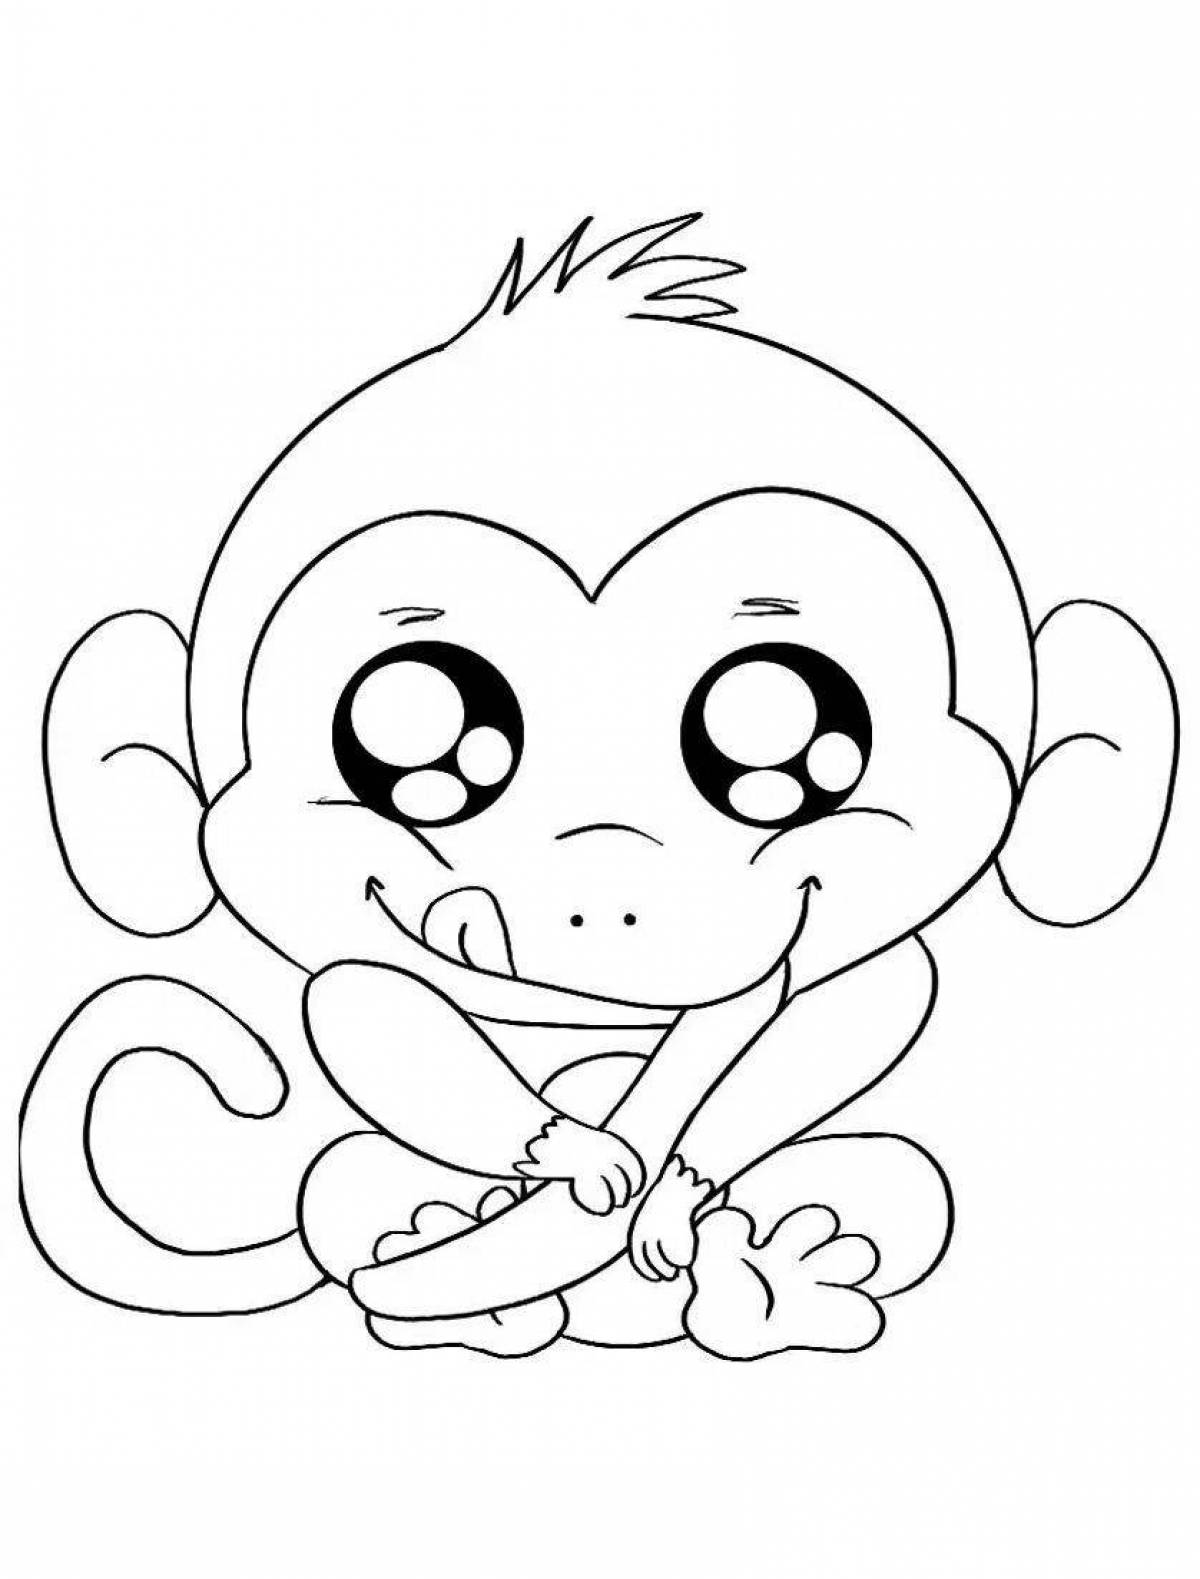 A funny monkey coloring book